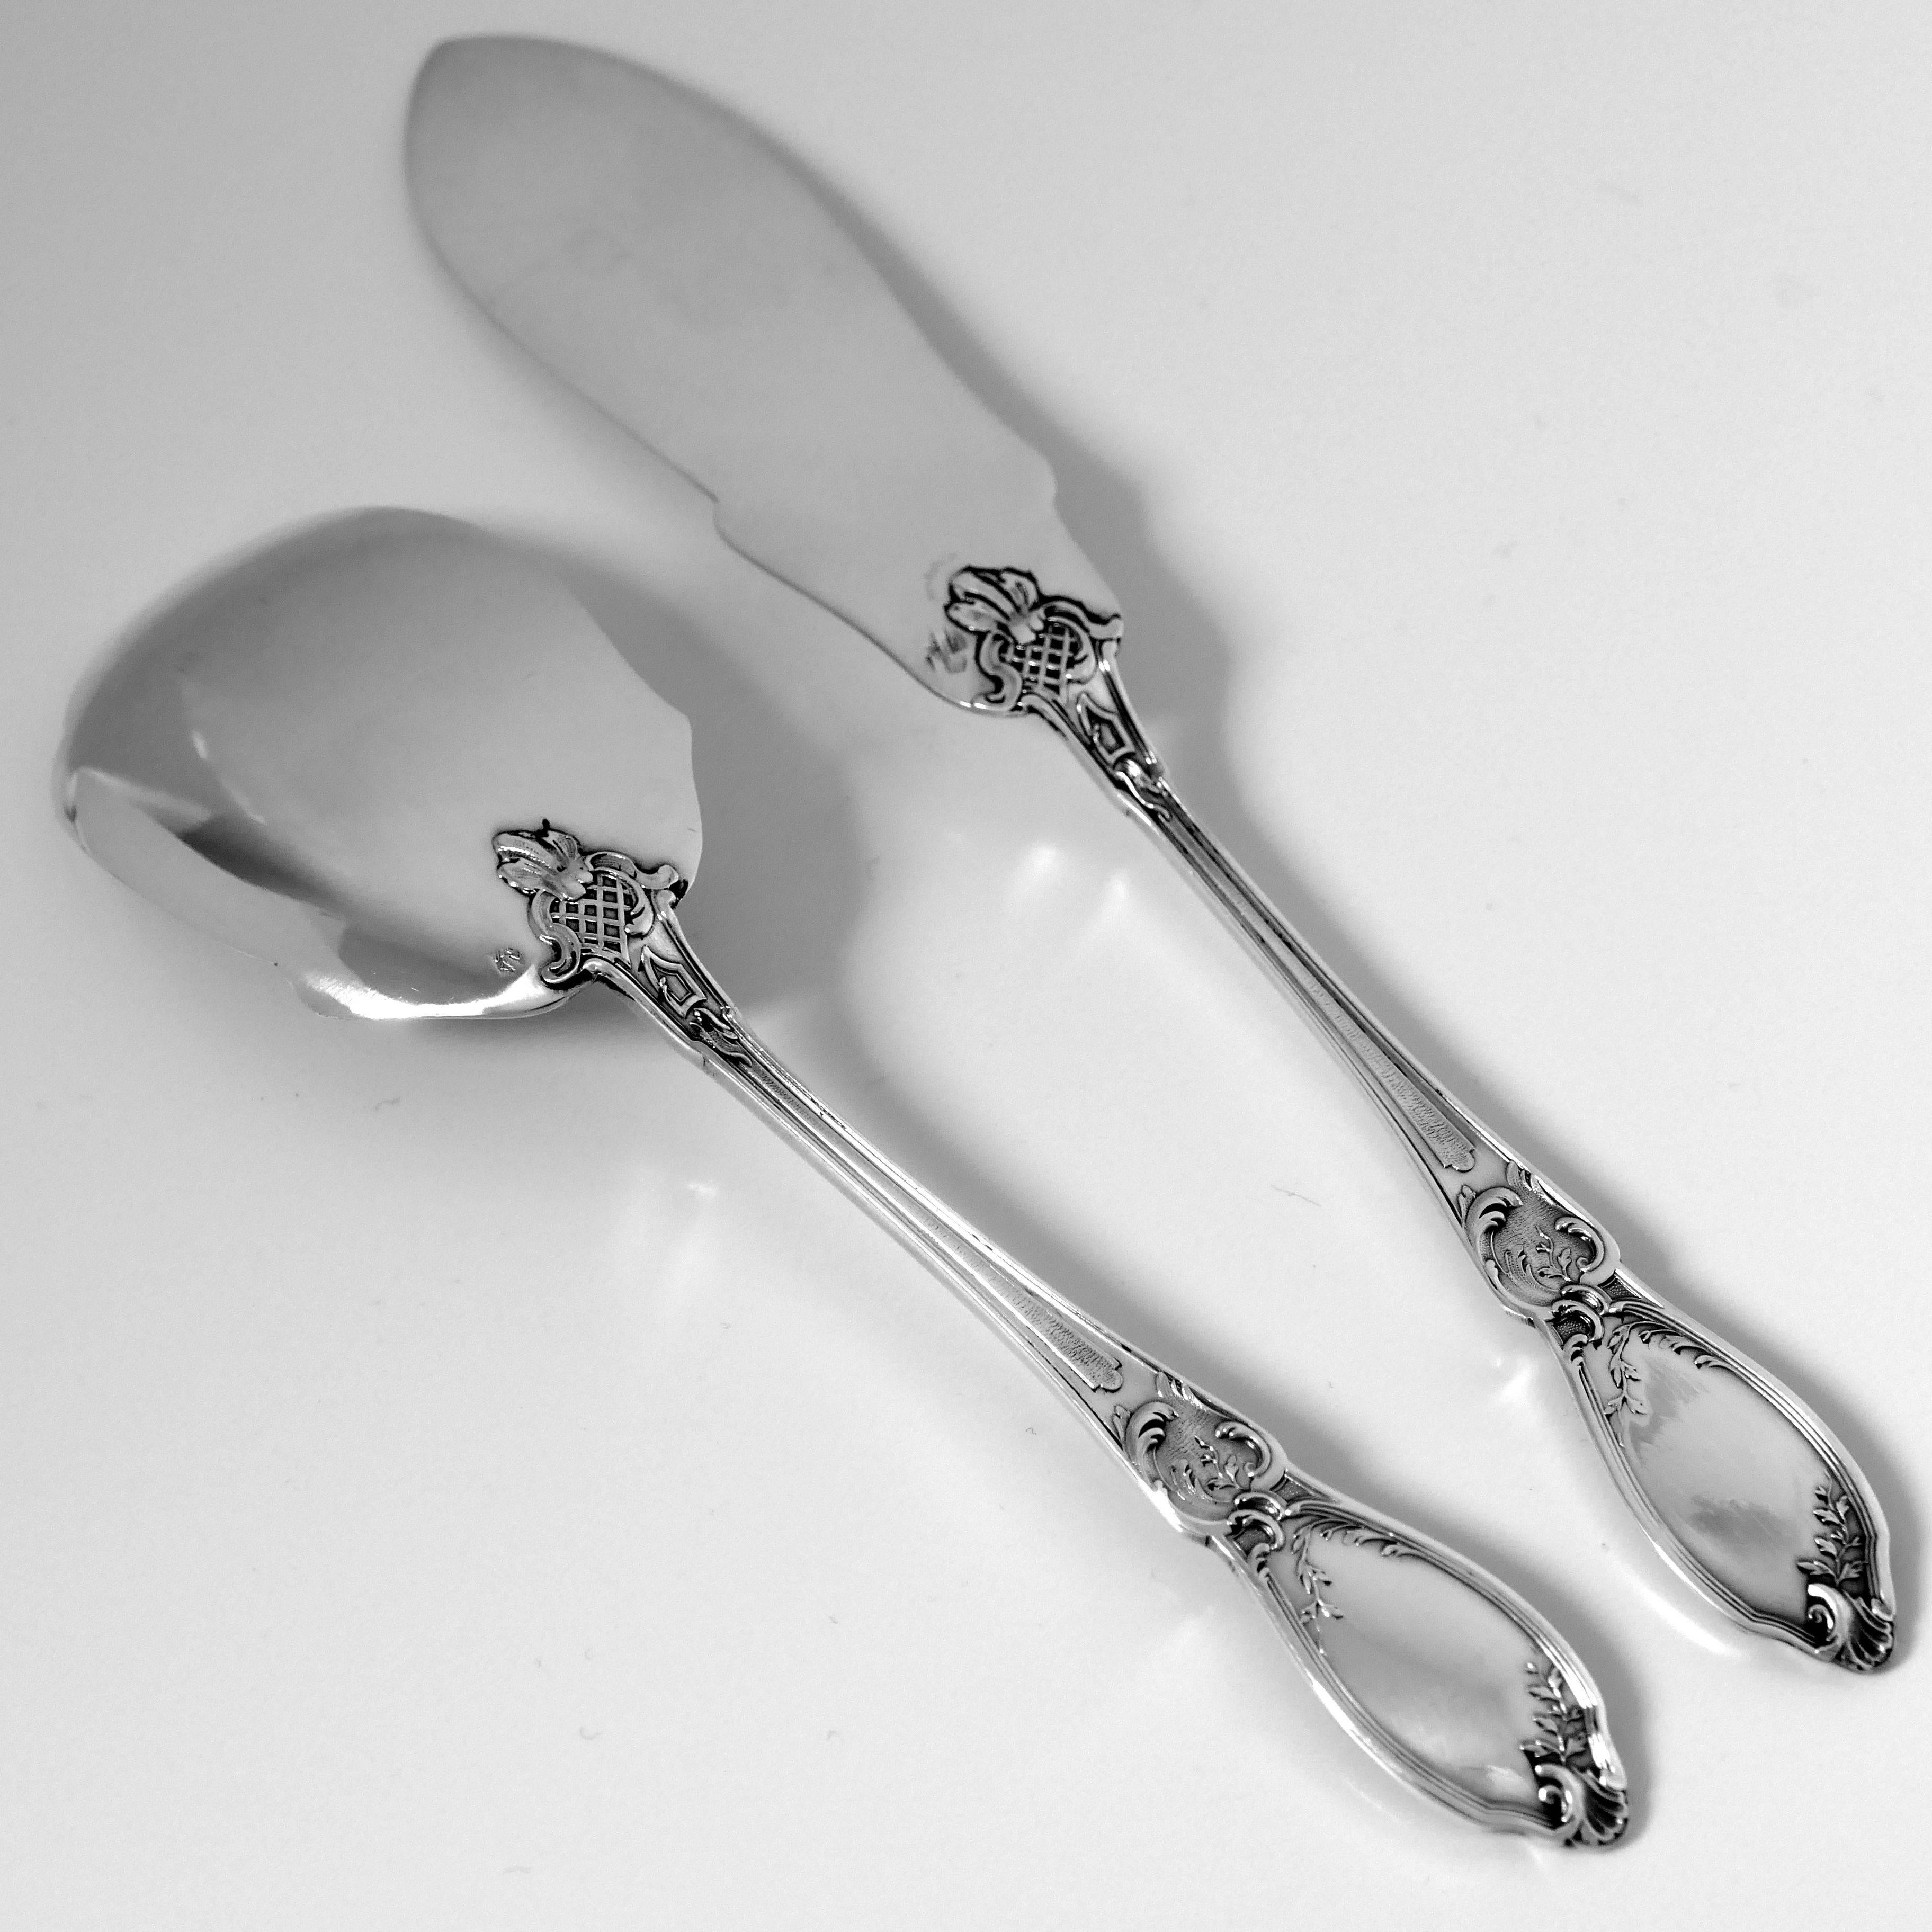 Doutre Roussel French All Sterling Silver Dessert Hors D'oeuvre Set 4 Pc, Box For Sale 2